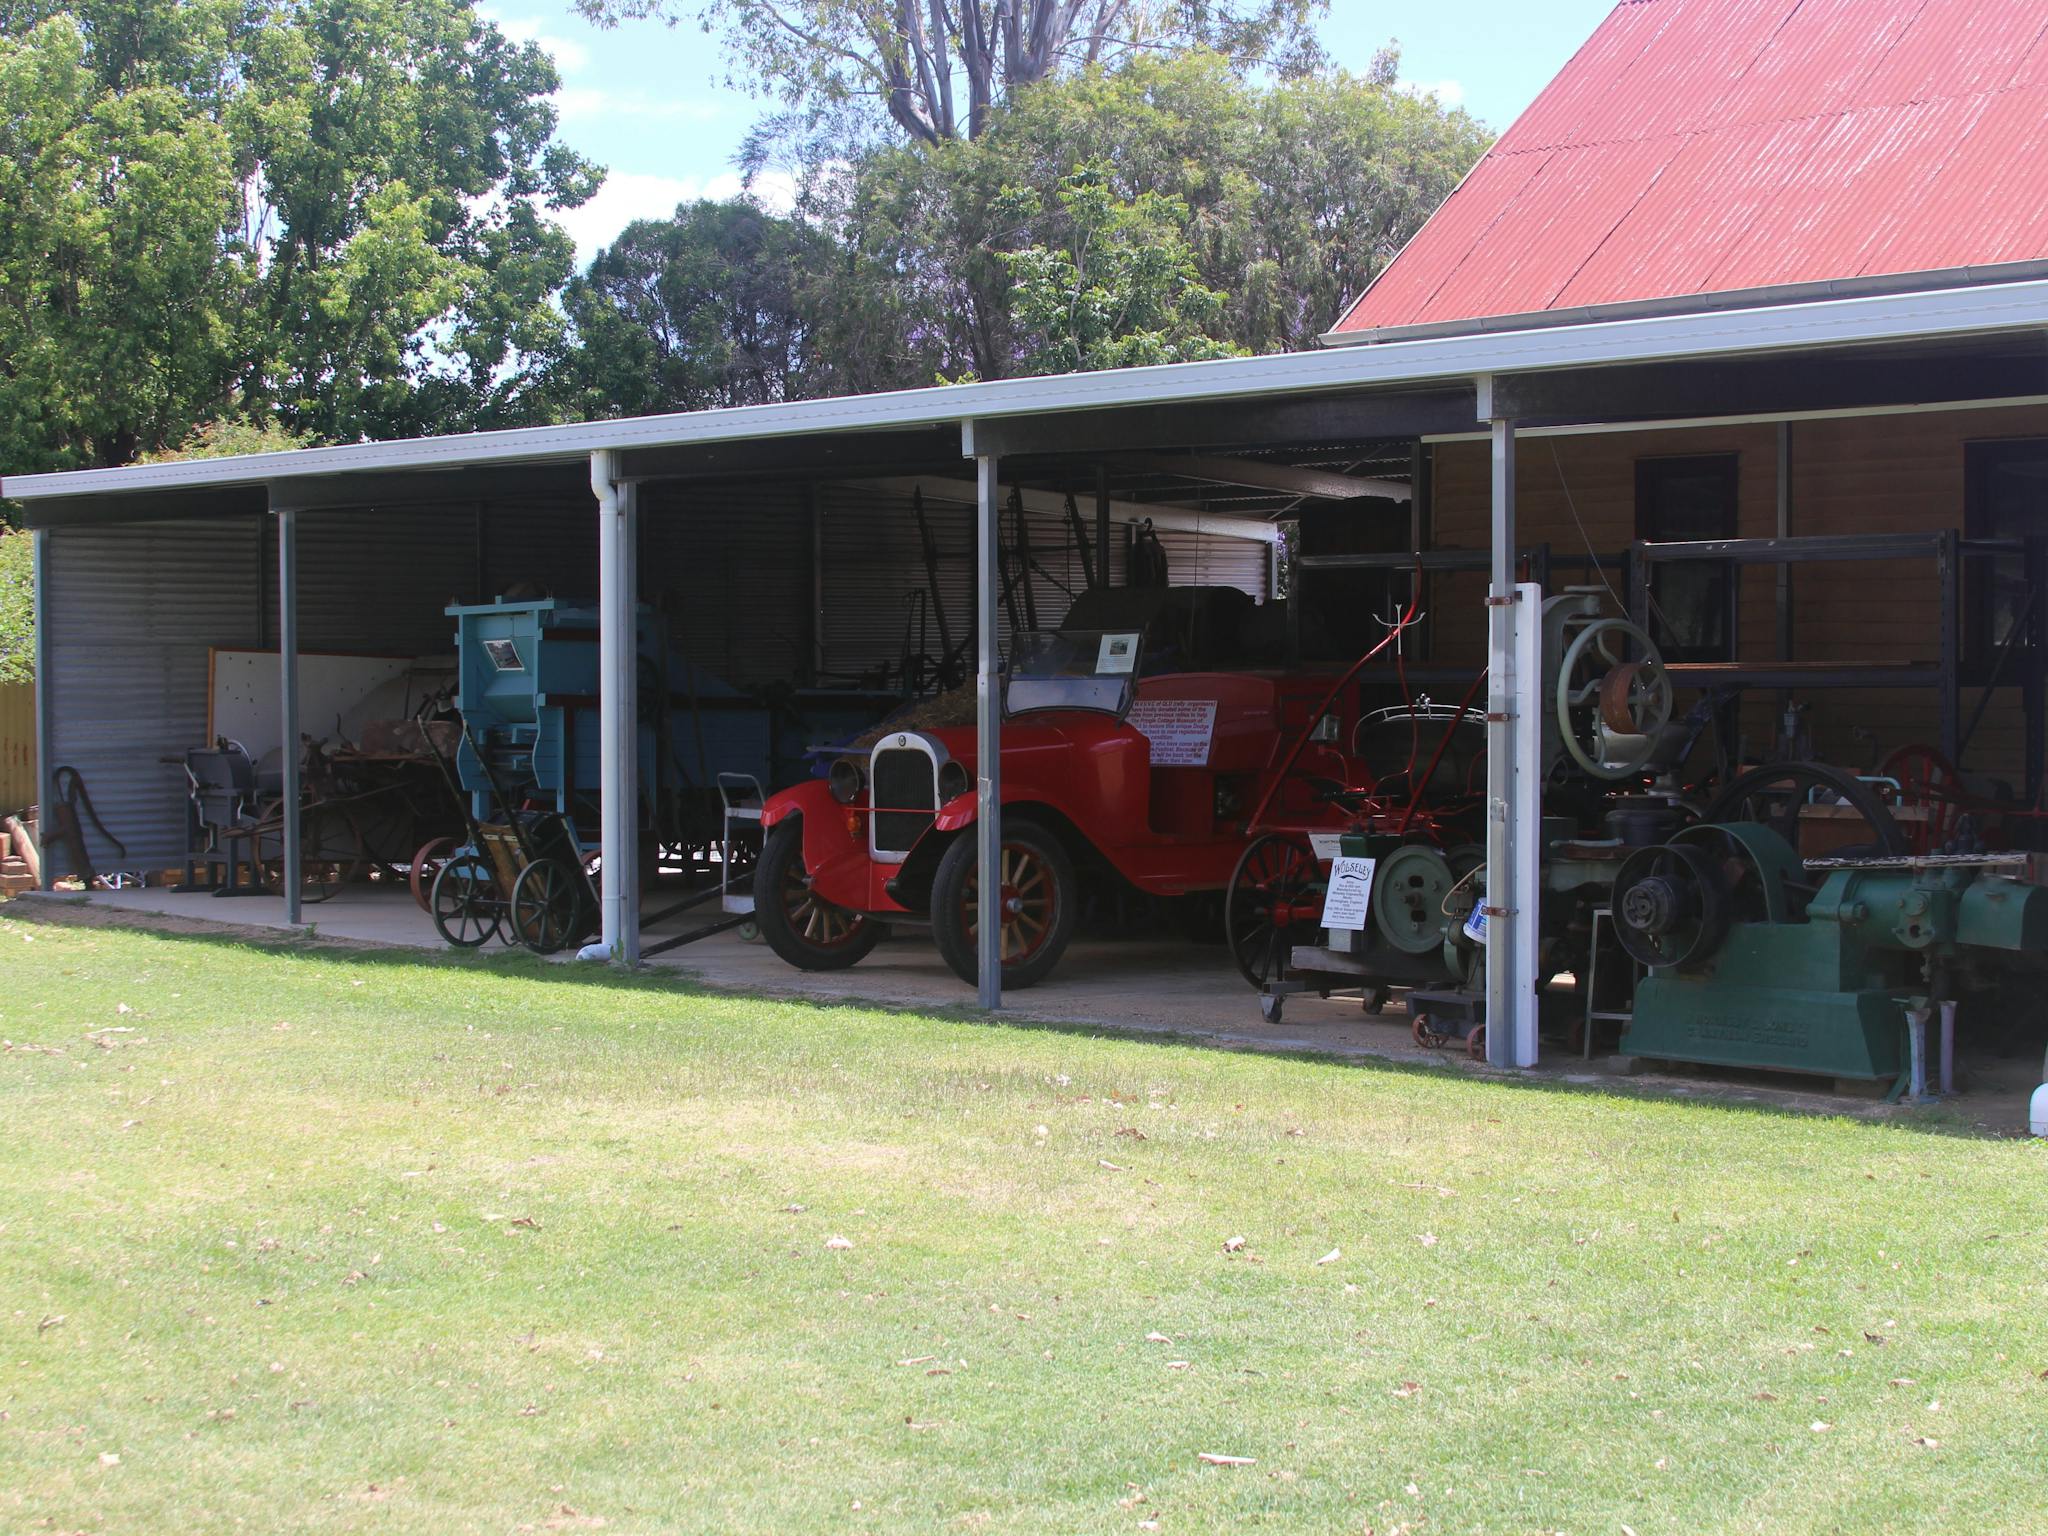 A shed containing a collection of historical farming machinery and an old fire engine.